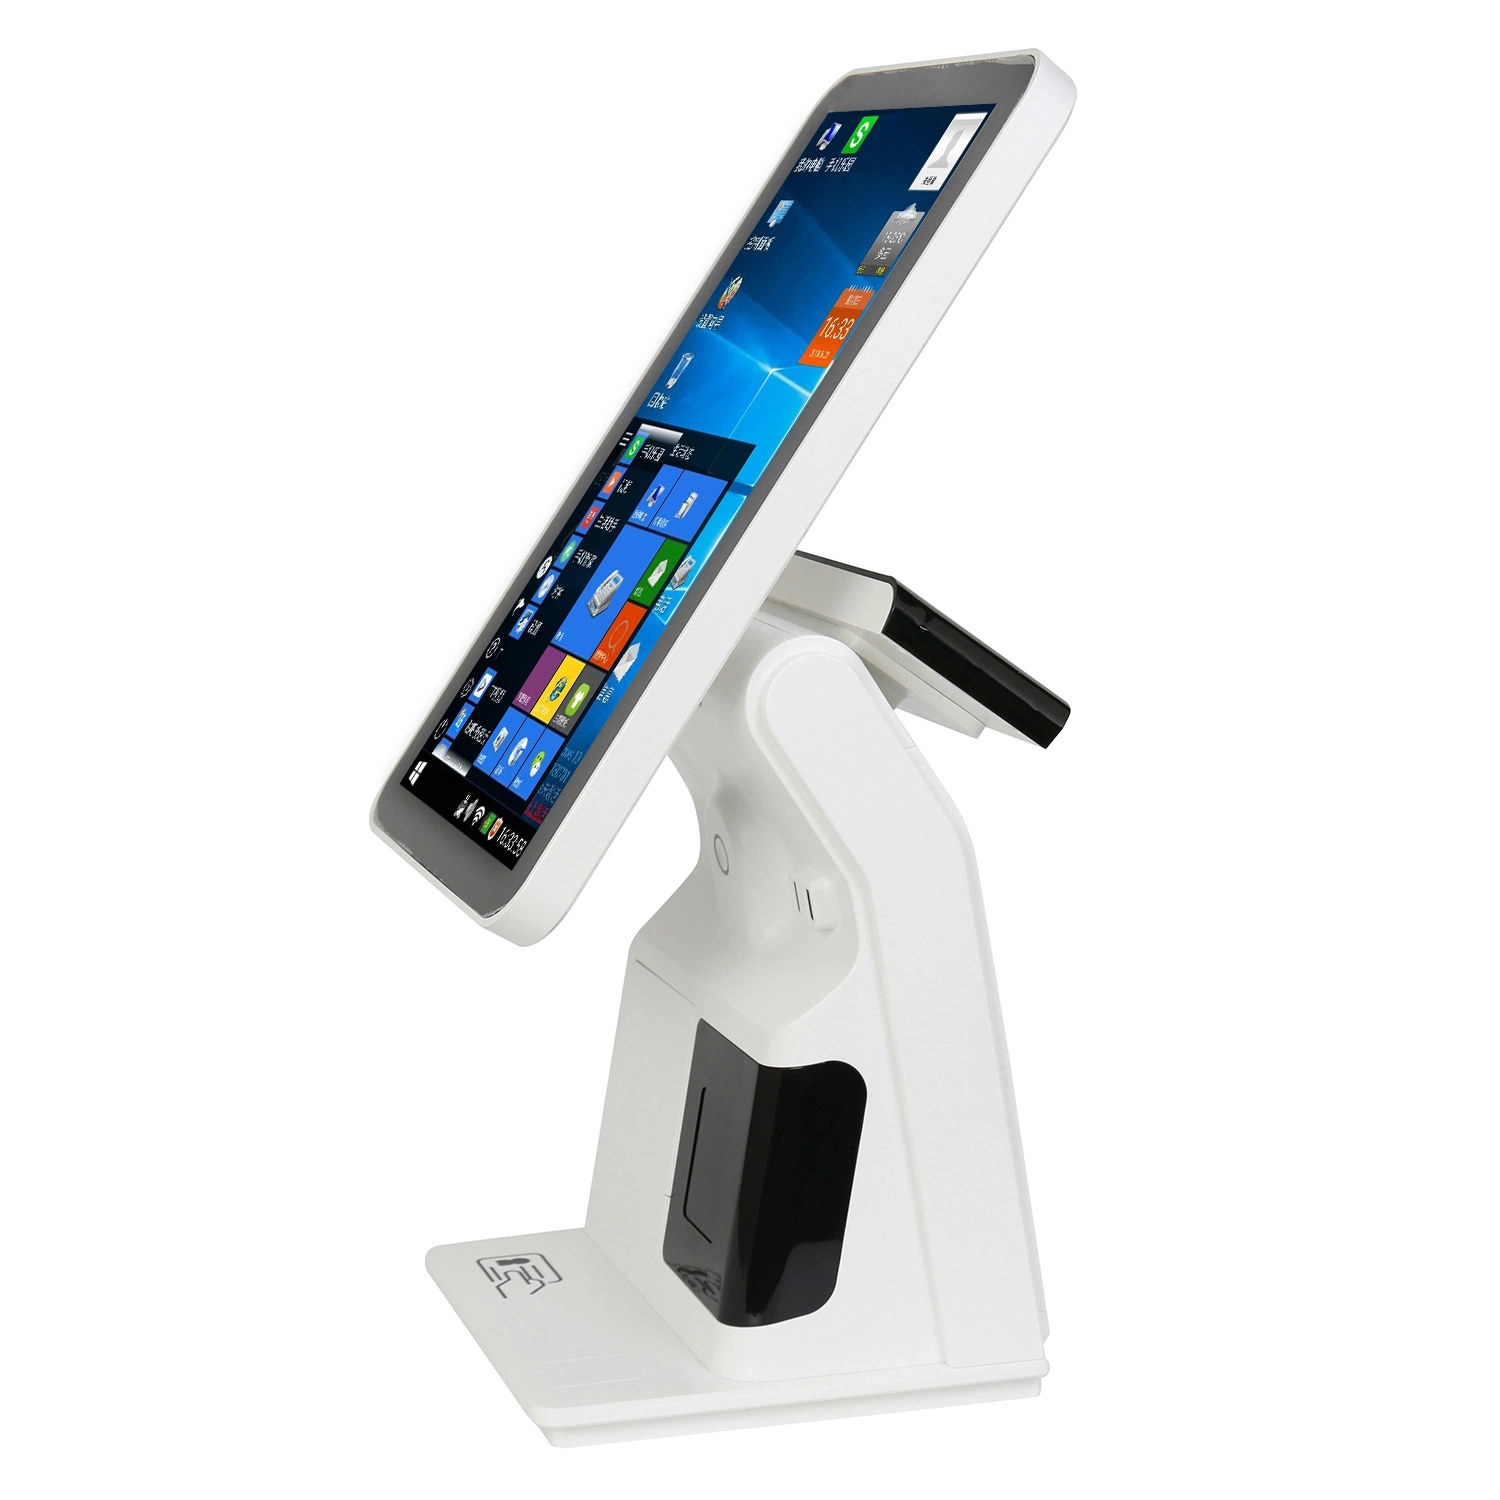 Windows POS Terminal 15.6" Point of Sales System with Receipt Printer